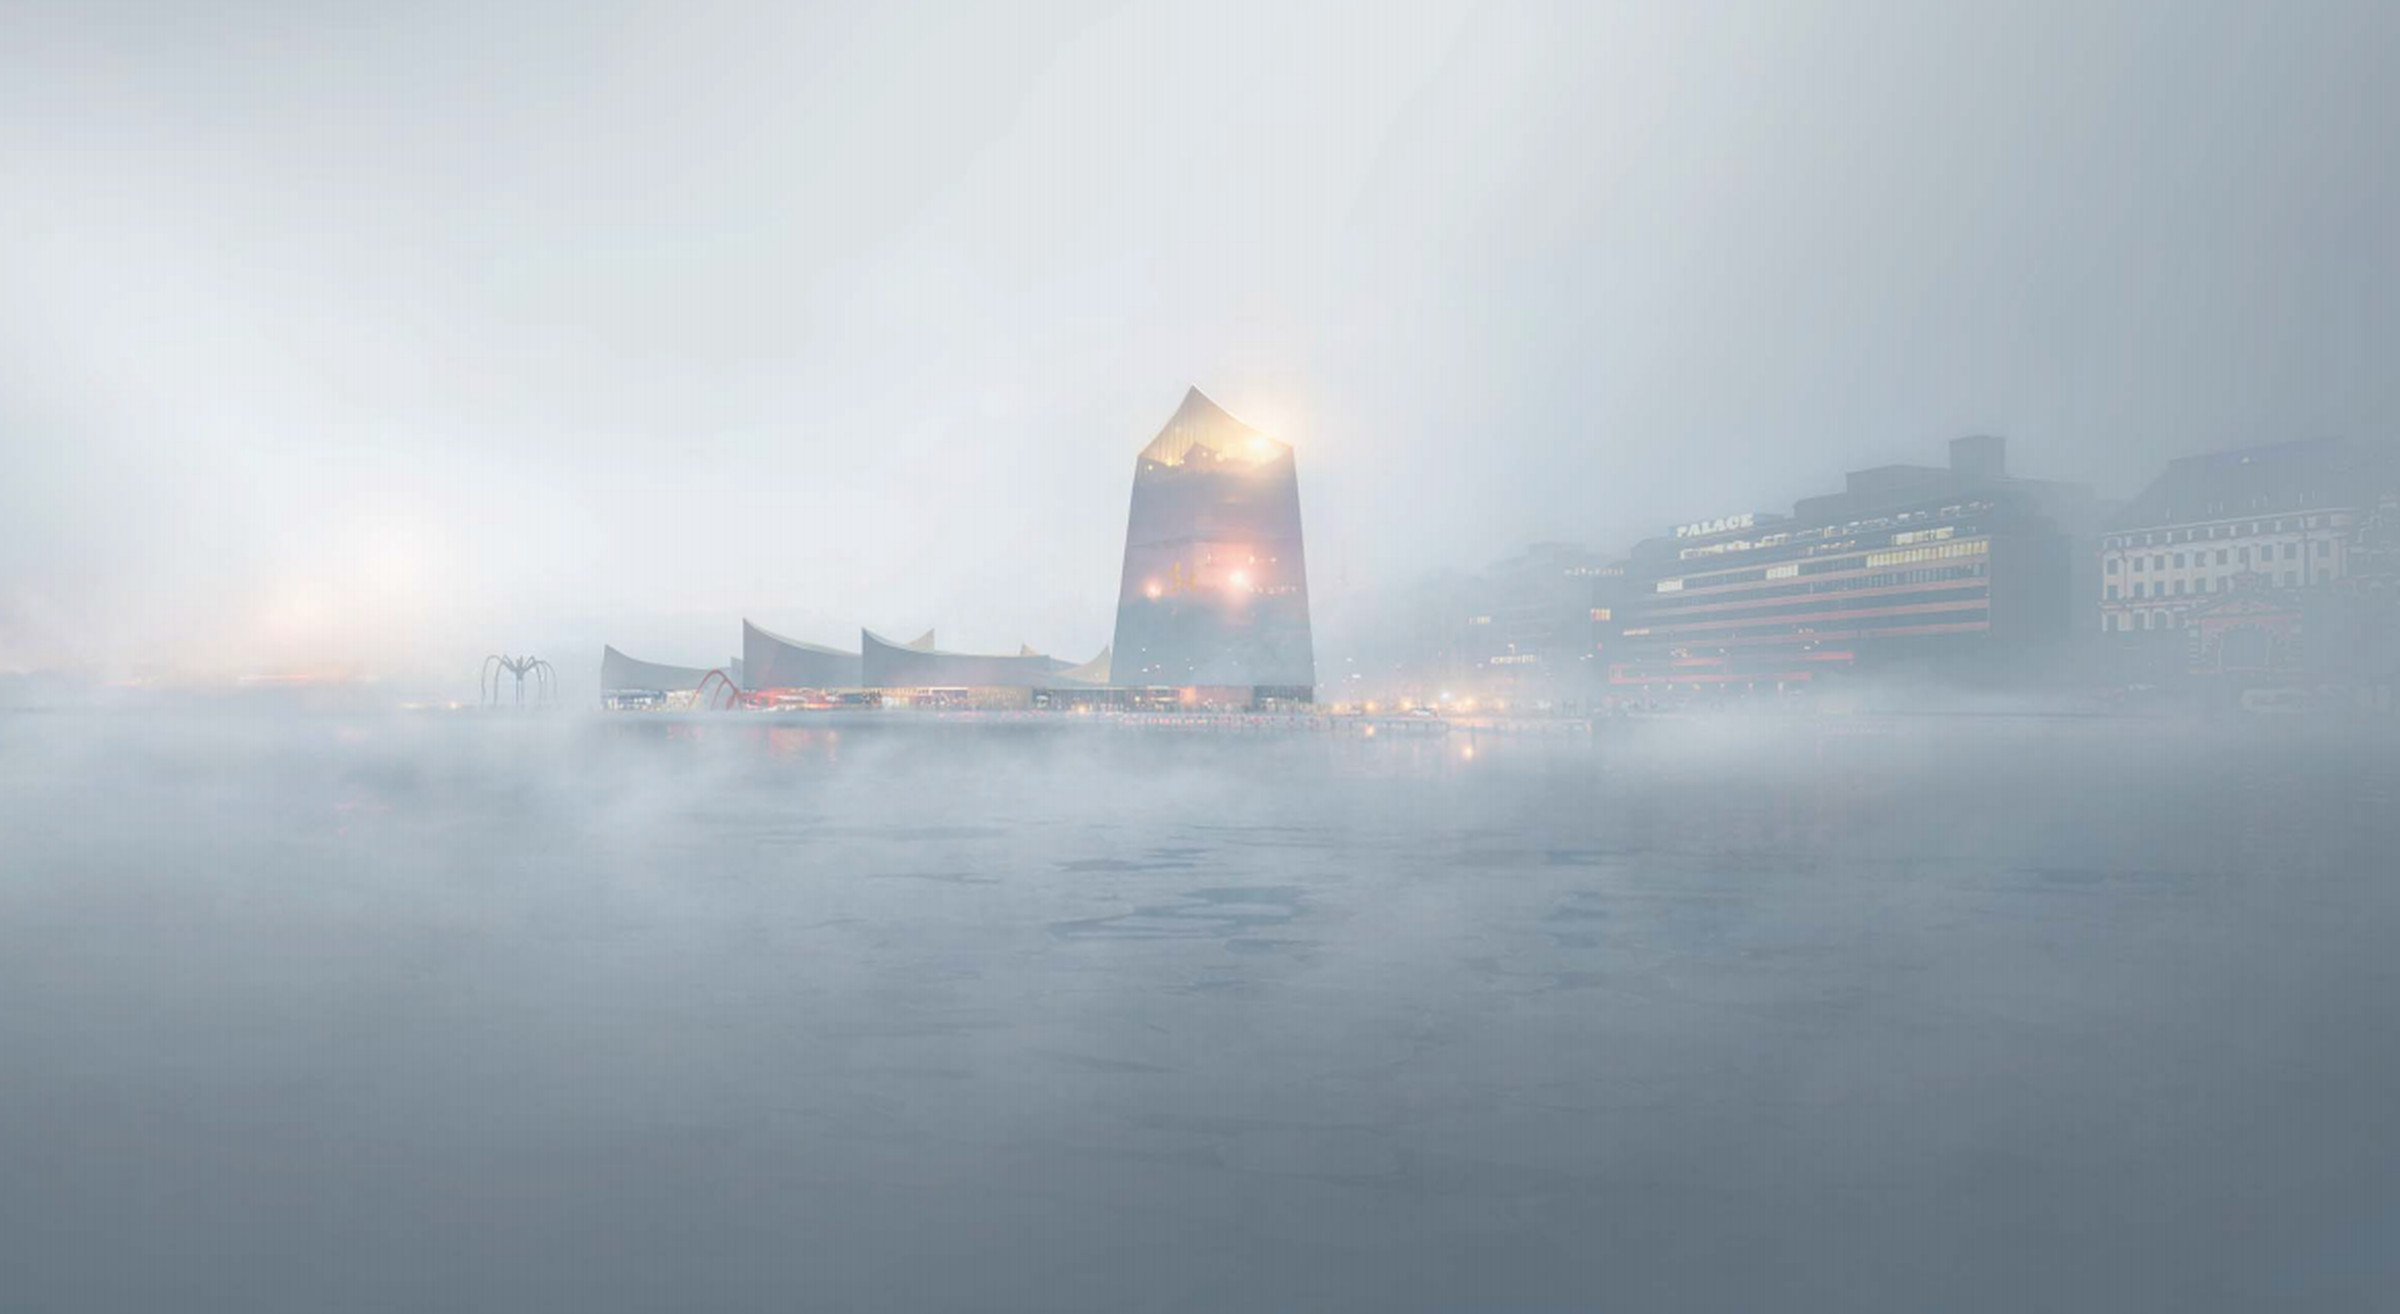 Guggenheim Helsinki will be made from charred timber